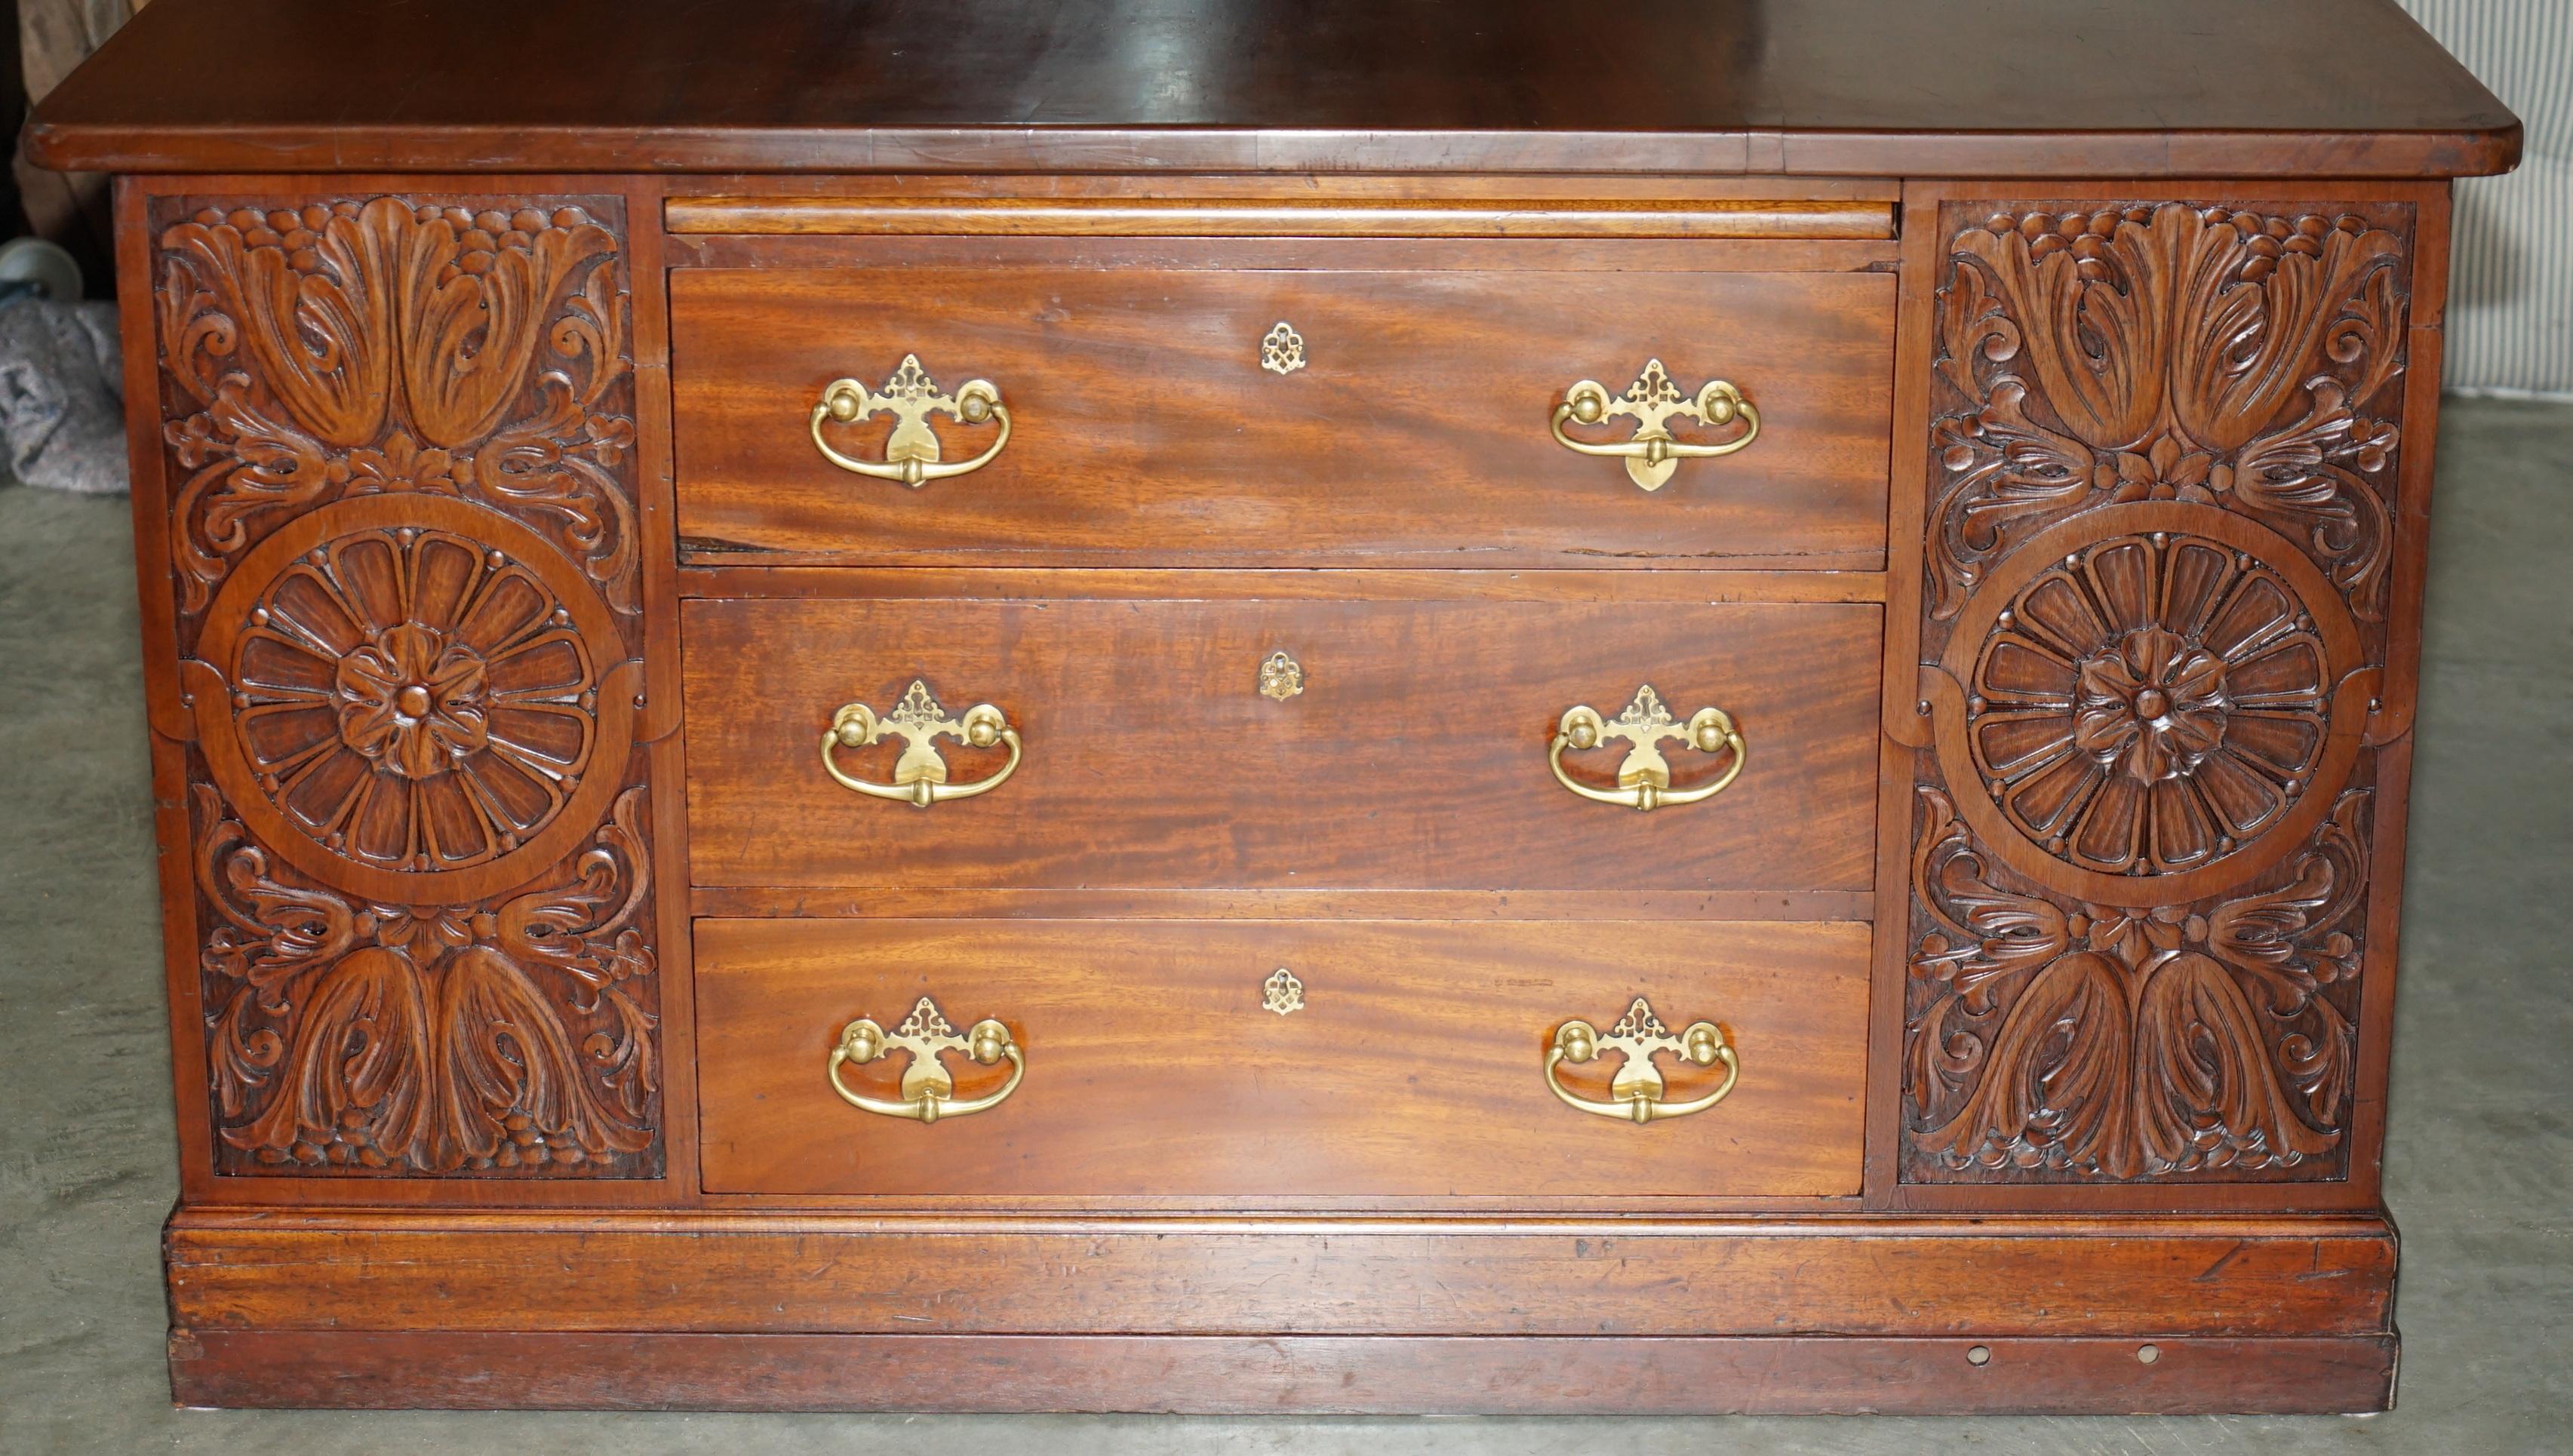 RIESIGE ANTIQUE VICTORIAN THOMAS CHIPPENDALE ESTATE DESK OR TWO SIDEBOARD DRAWERs im Angebot 1